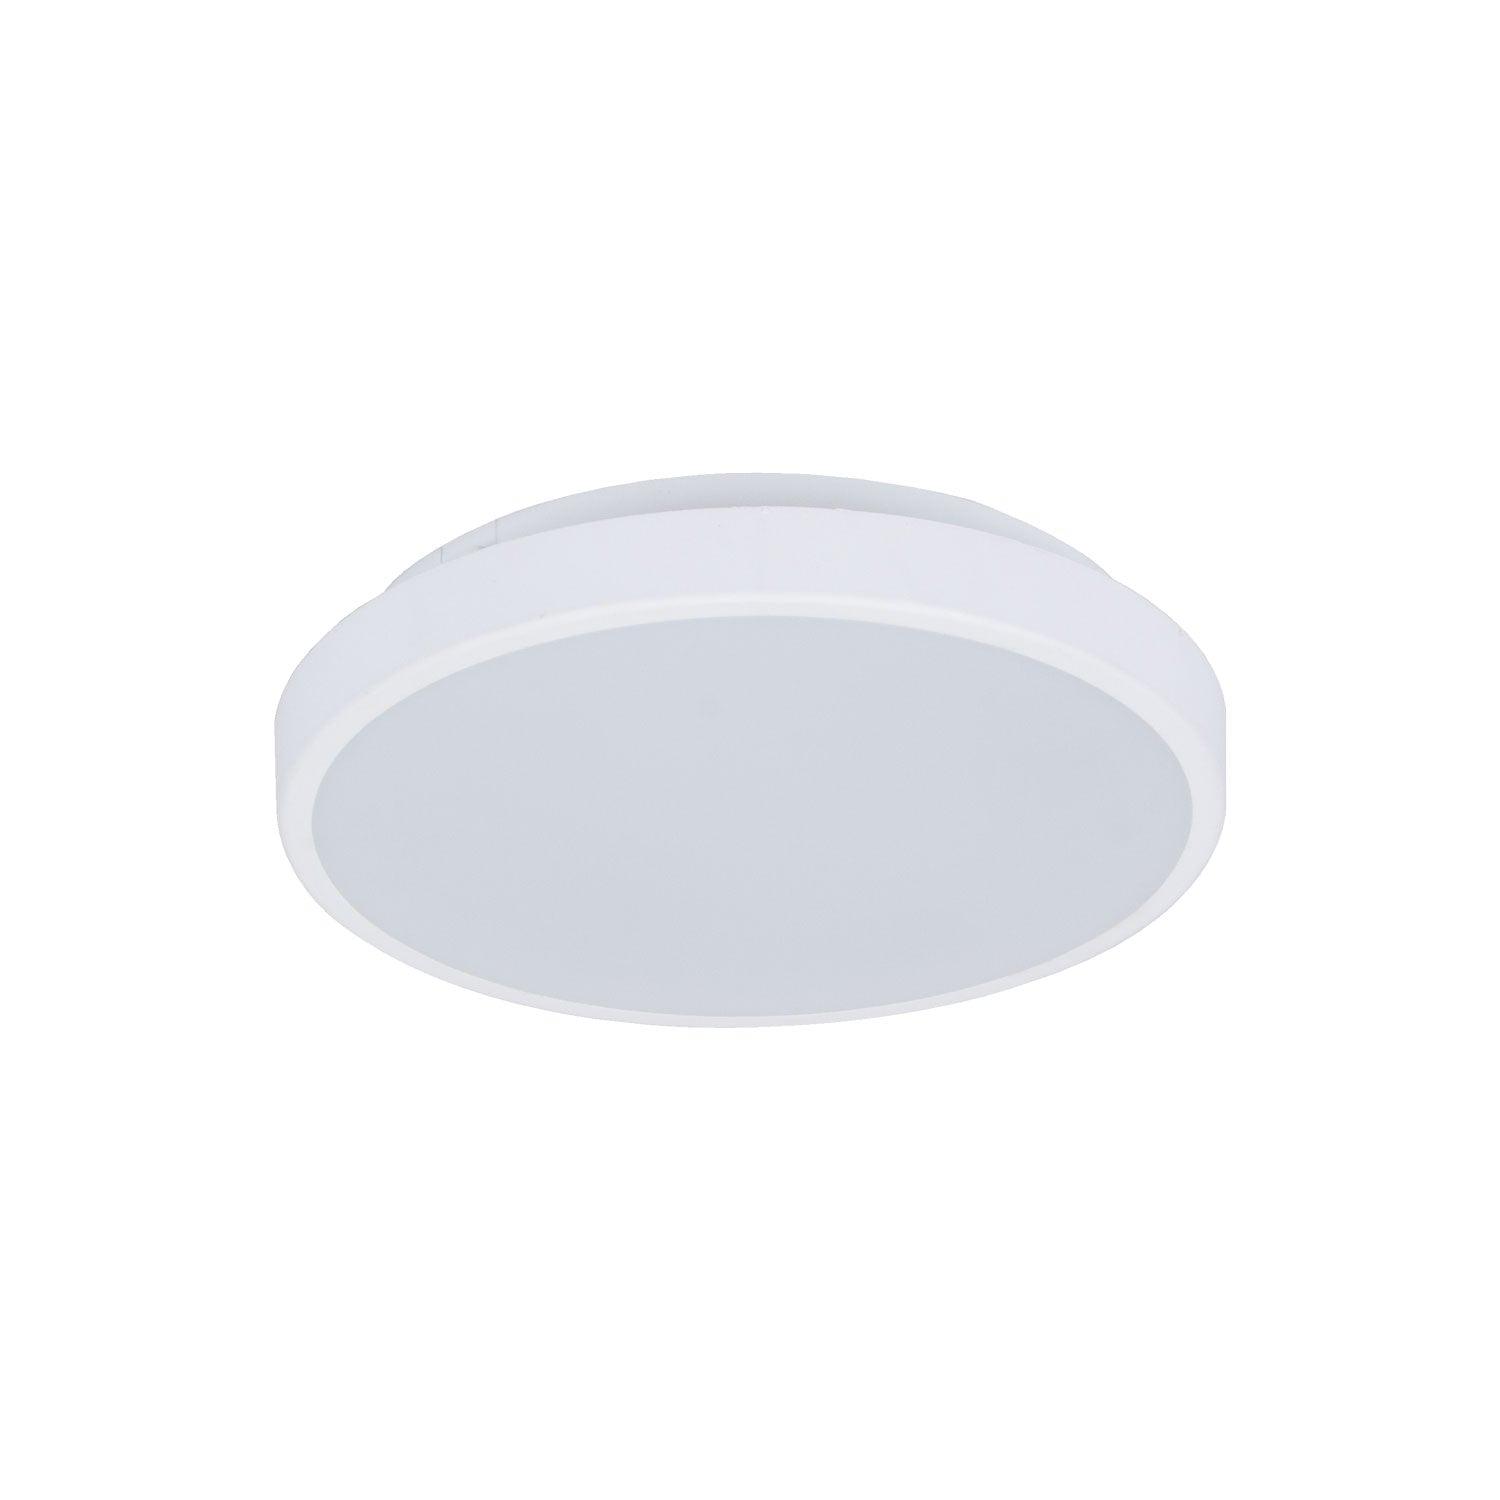 Domus Lighting Oyster Lights WHITE / 18W Easy - 10W/18W/25W Round Colour Switchable Led Ceiling Light Ip54 240V - Trio Lights-For-You 20955